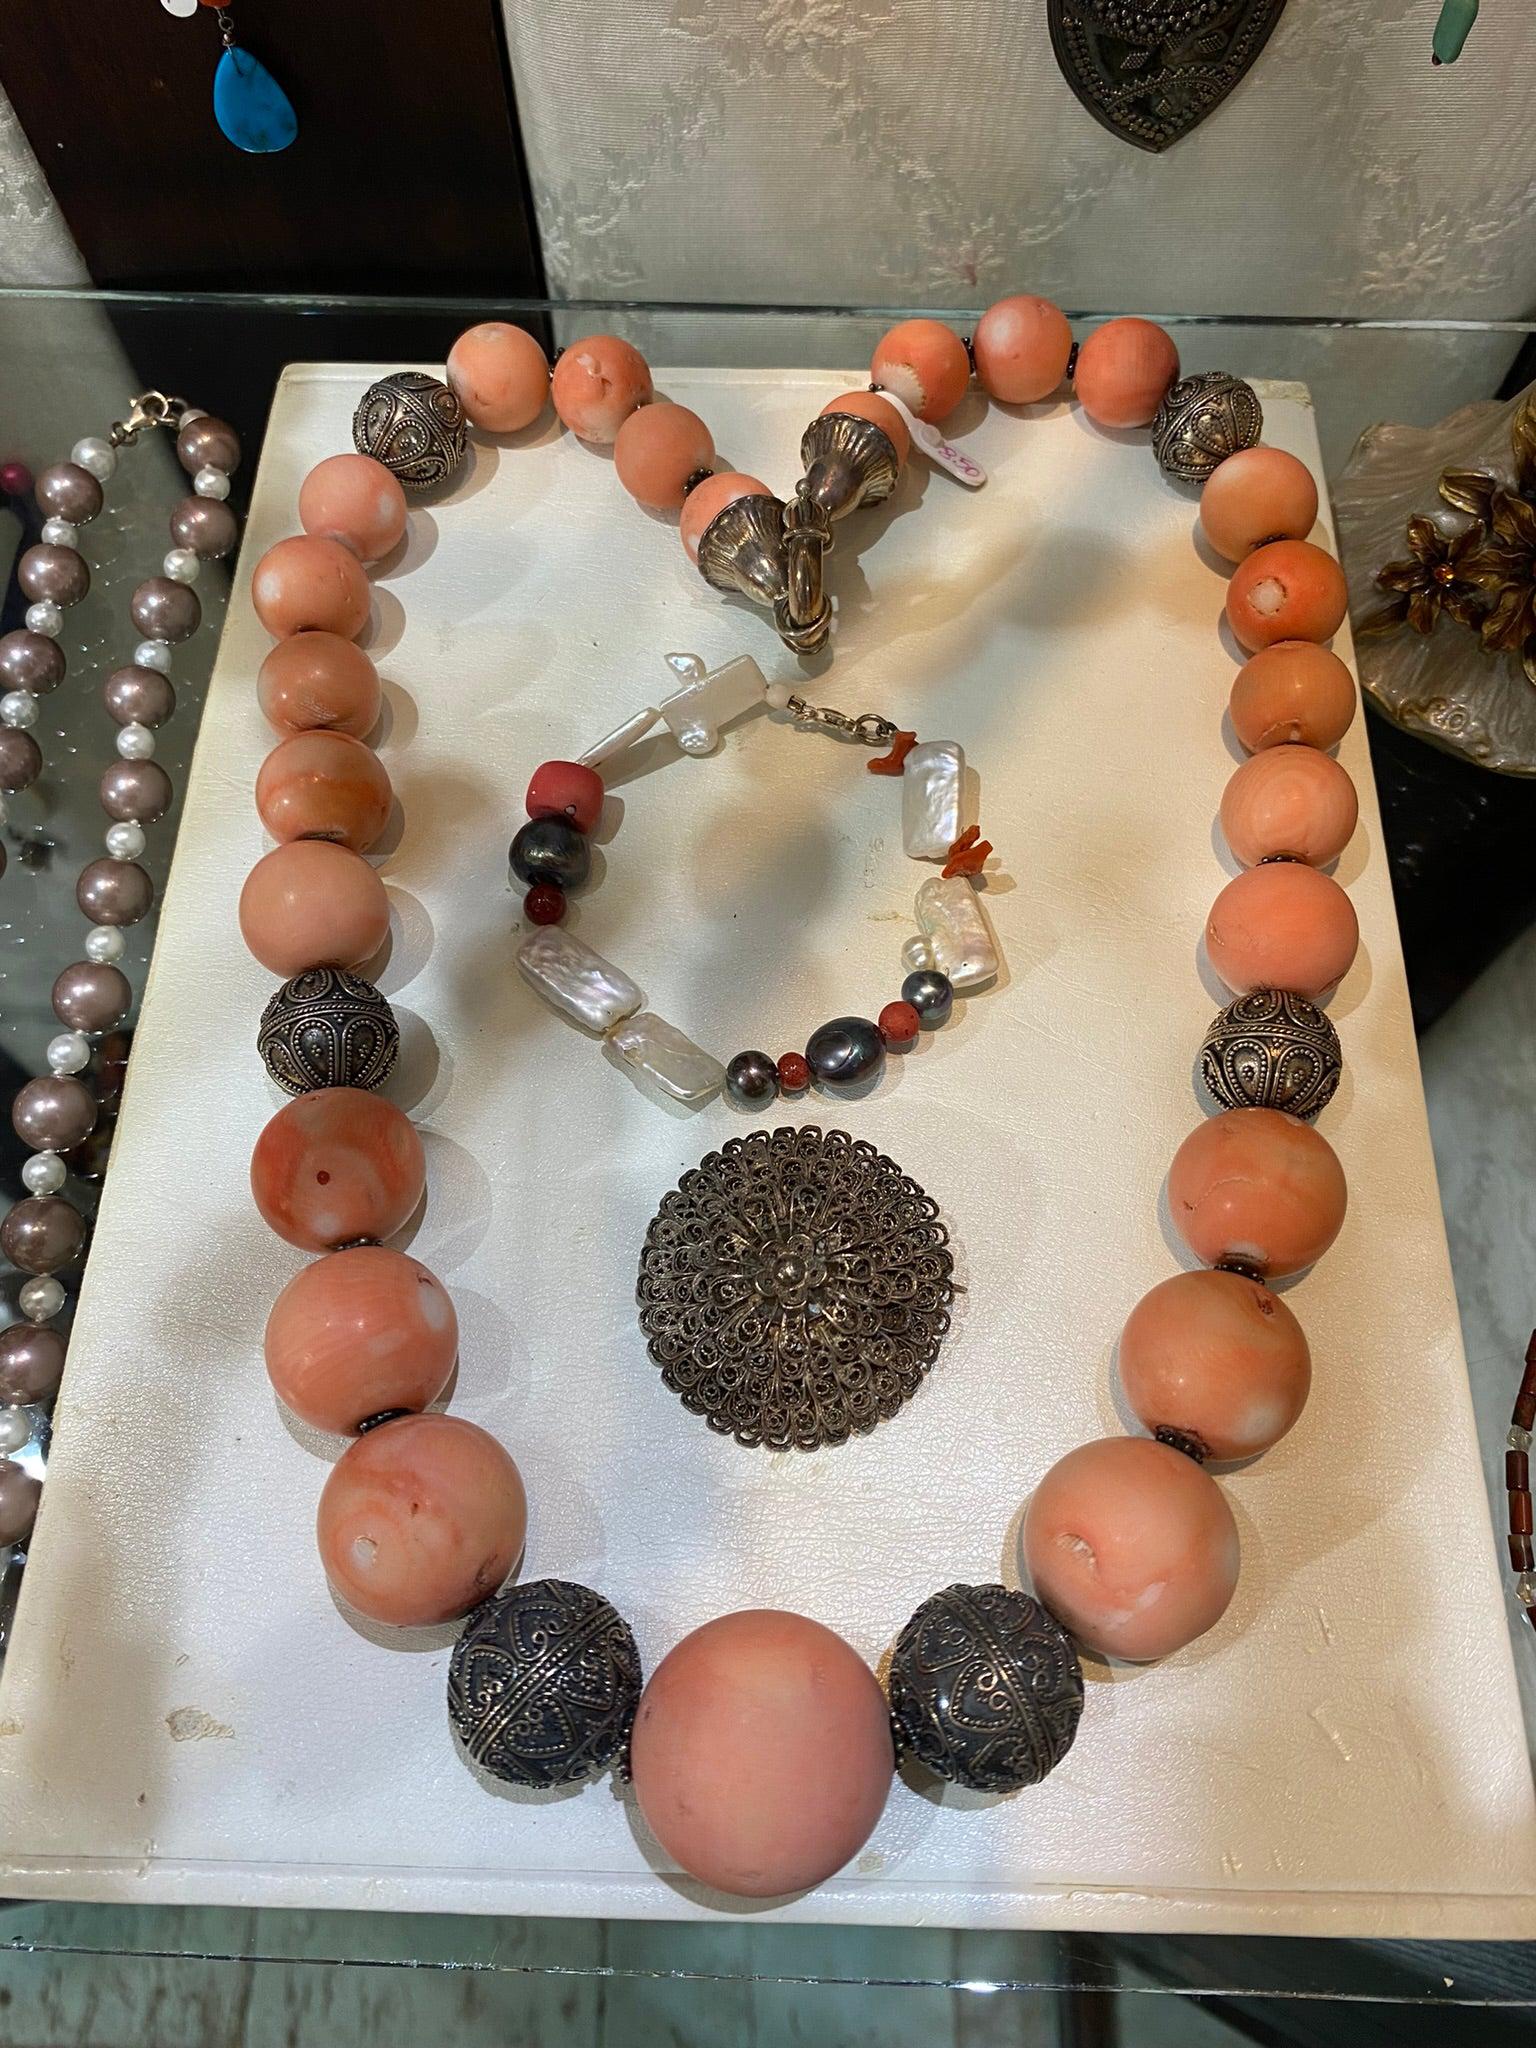 Necklace with Pink Coral Stones (Angel Skin) and Silver Elements